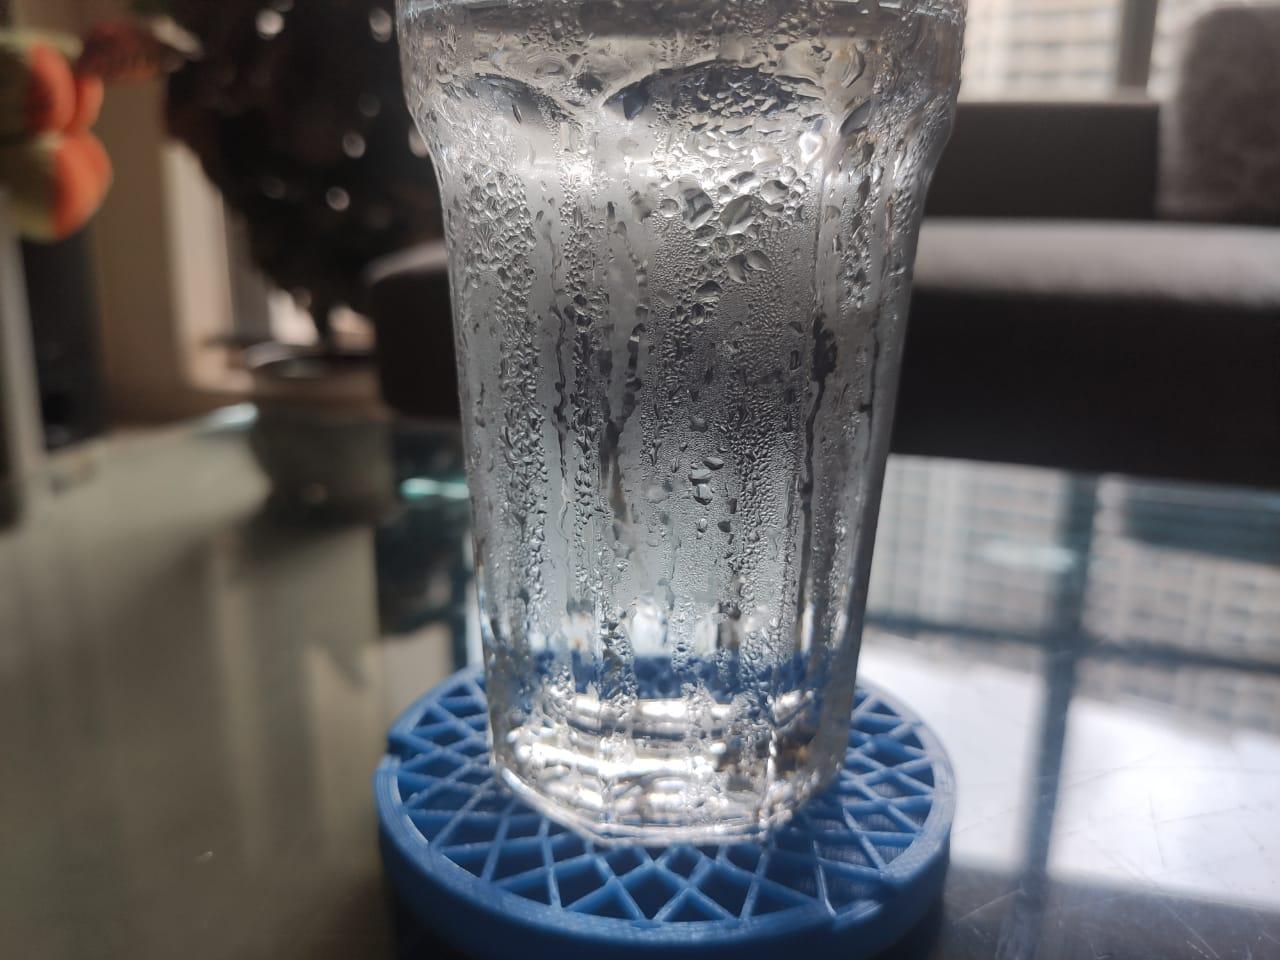 Father of all Coasters - The Coaster collects all condensed water droplets
 - 3d model